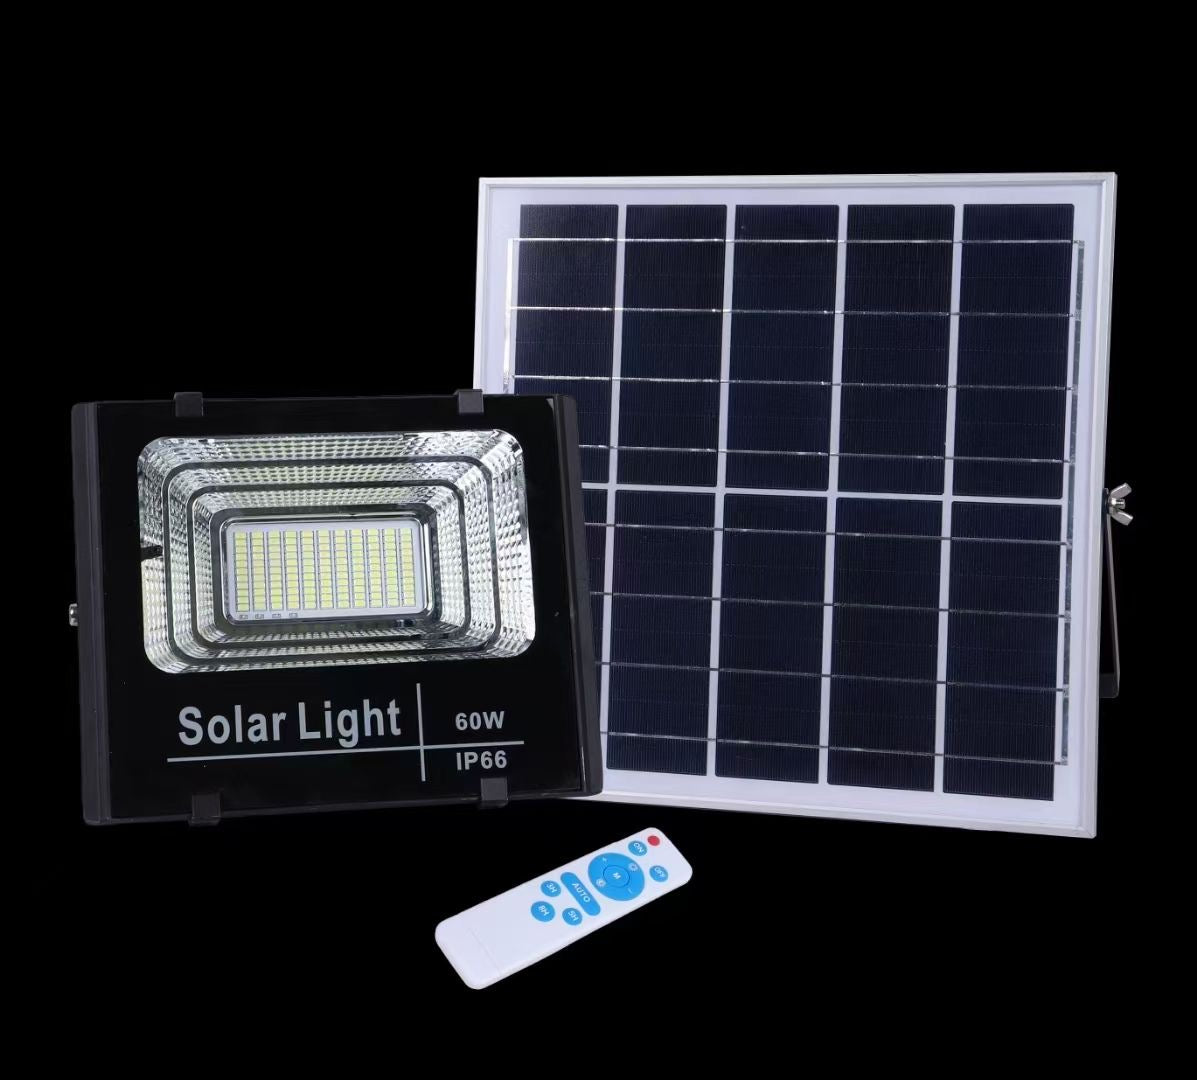 Solar floodlight with remote control